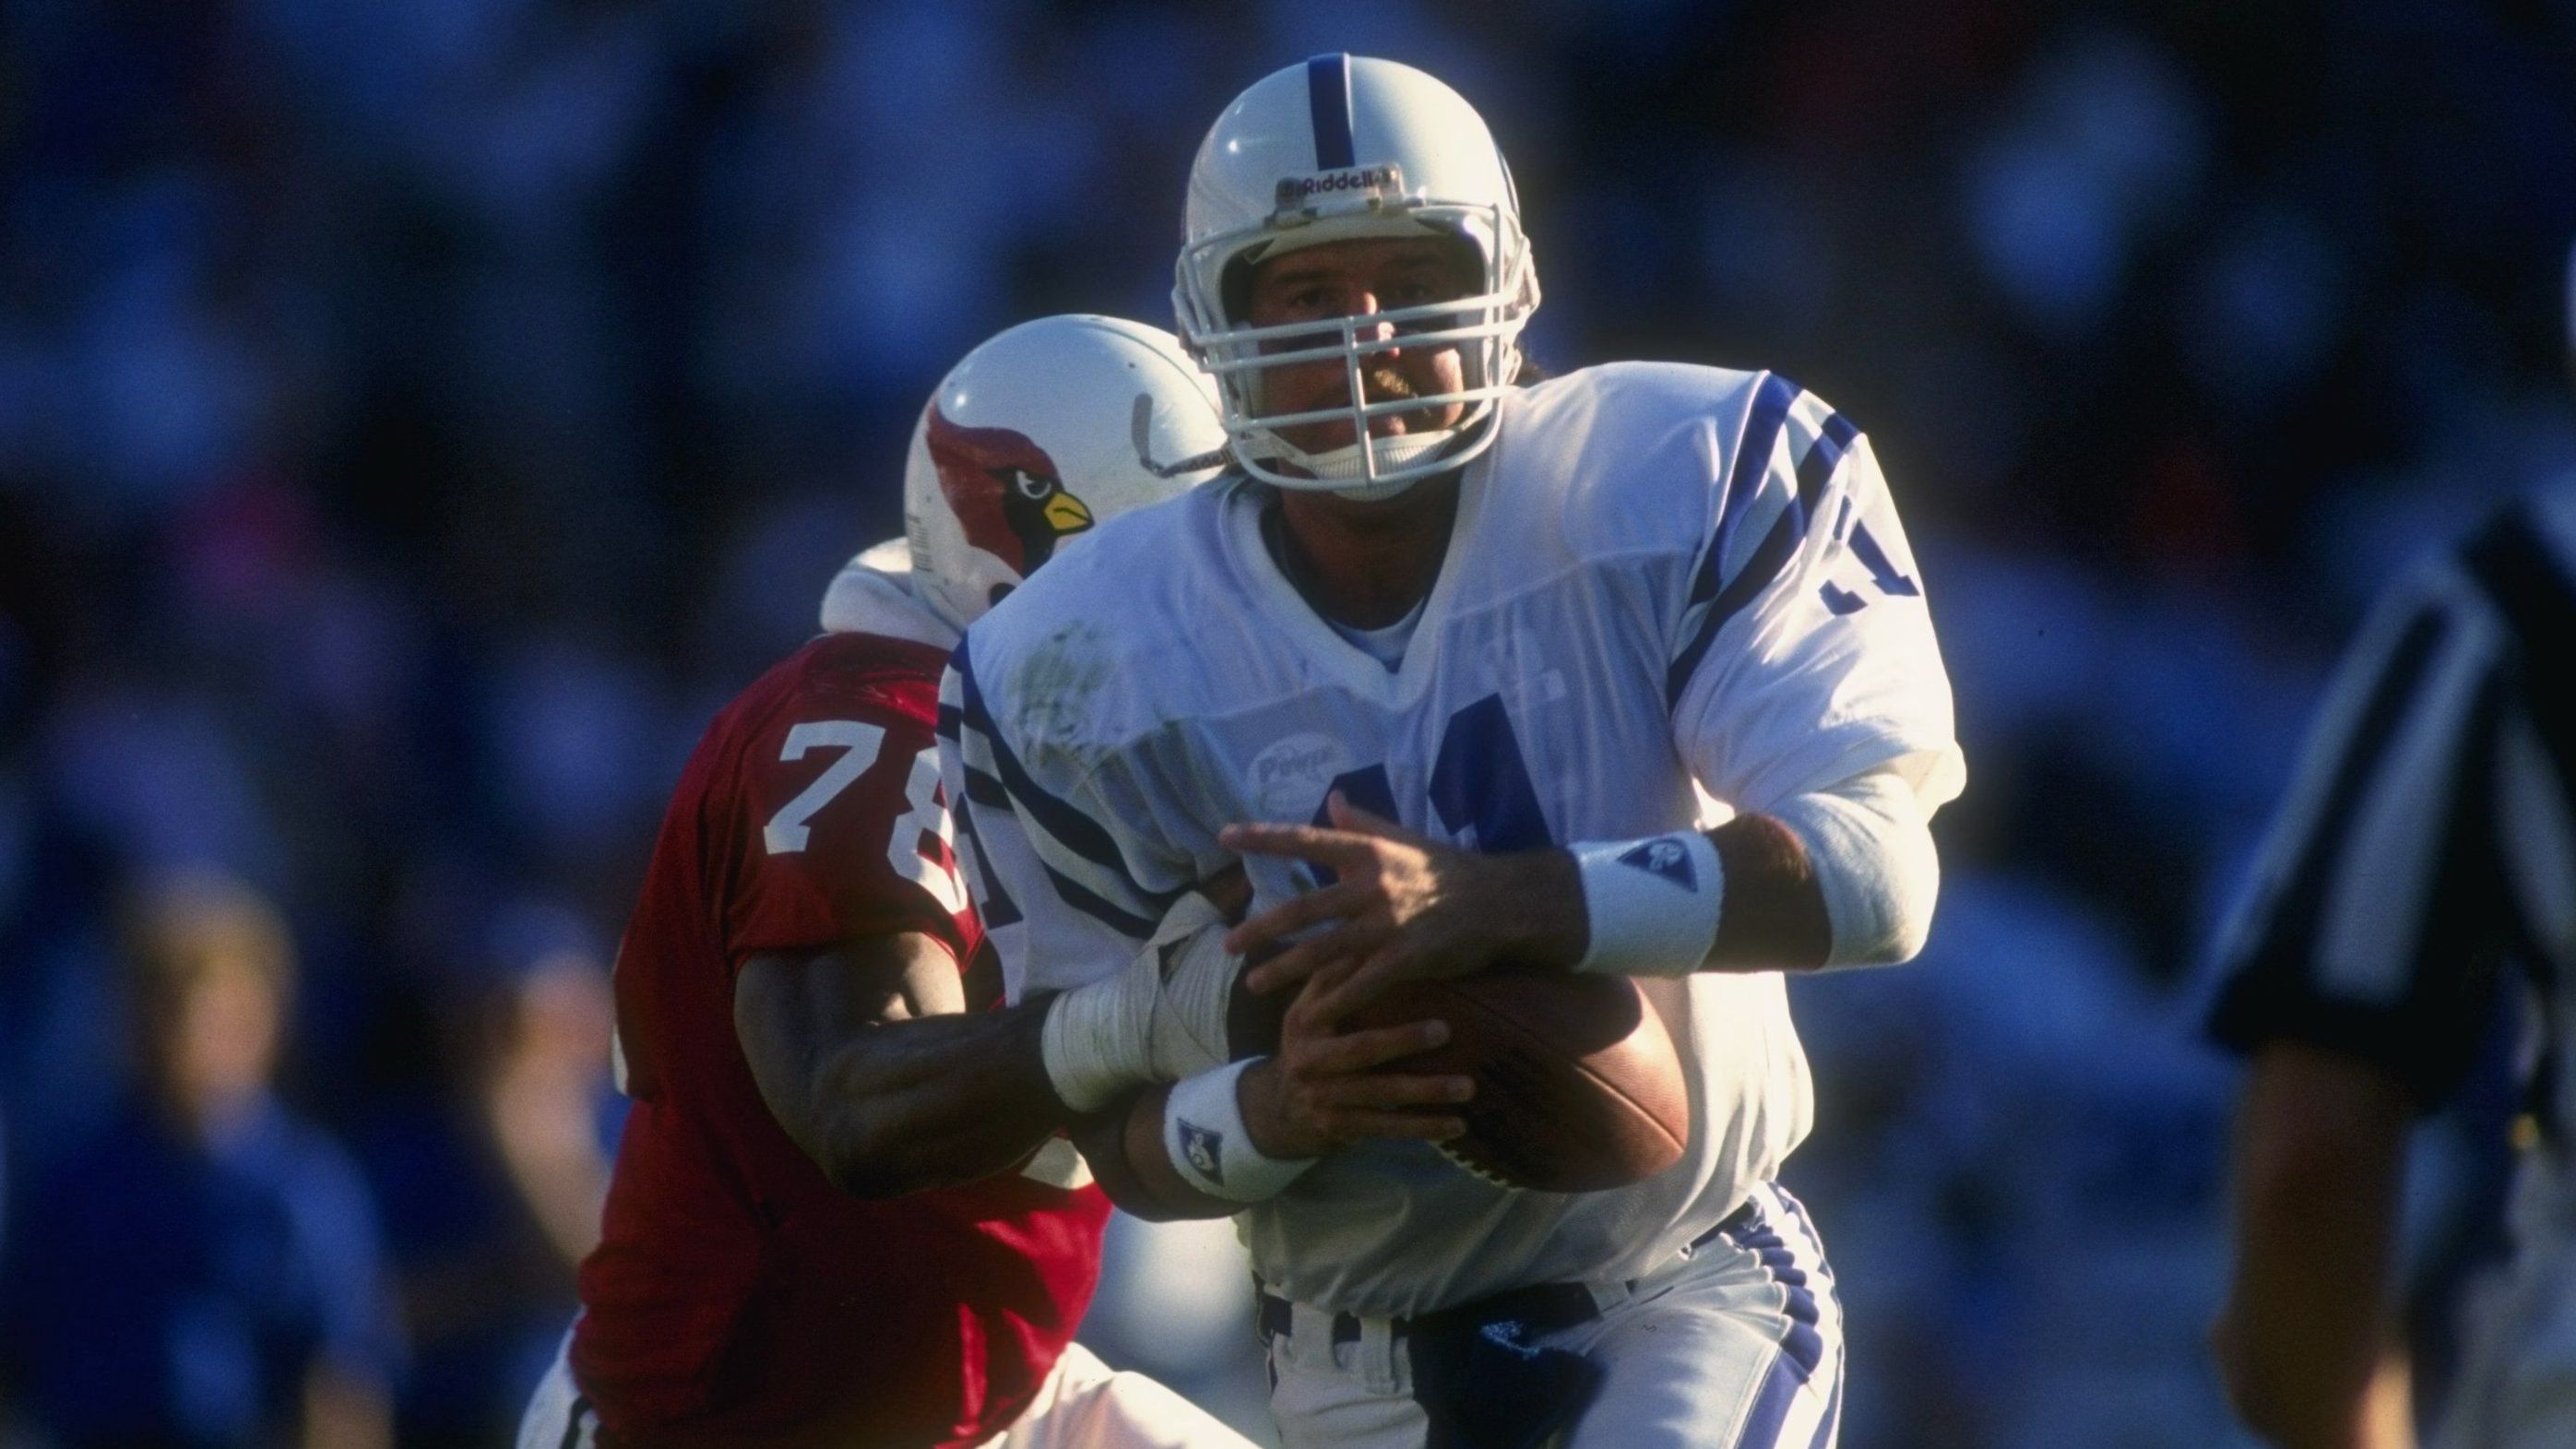 <strong>Jeff George</strong><br>- Teams: Indianapolis Colts (1990 – 1993), Atlanta Falcons (1994 - 1996), Oakland Raiders (1997 - 1998), Minnesota Vikings (1999), Washington Redskins (2000 - 2001), Seattle Seahawks (2002), Chicago Bears (2004), Oakland Raiders (2006)<br>- Bilanz zur Prime Time: 5-17<br>- Bilanz in Winning Percentage: 22,7 %